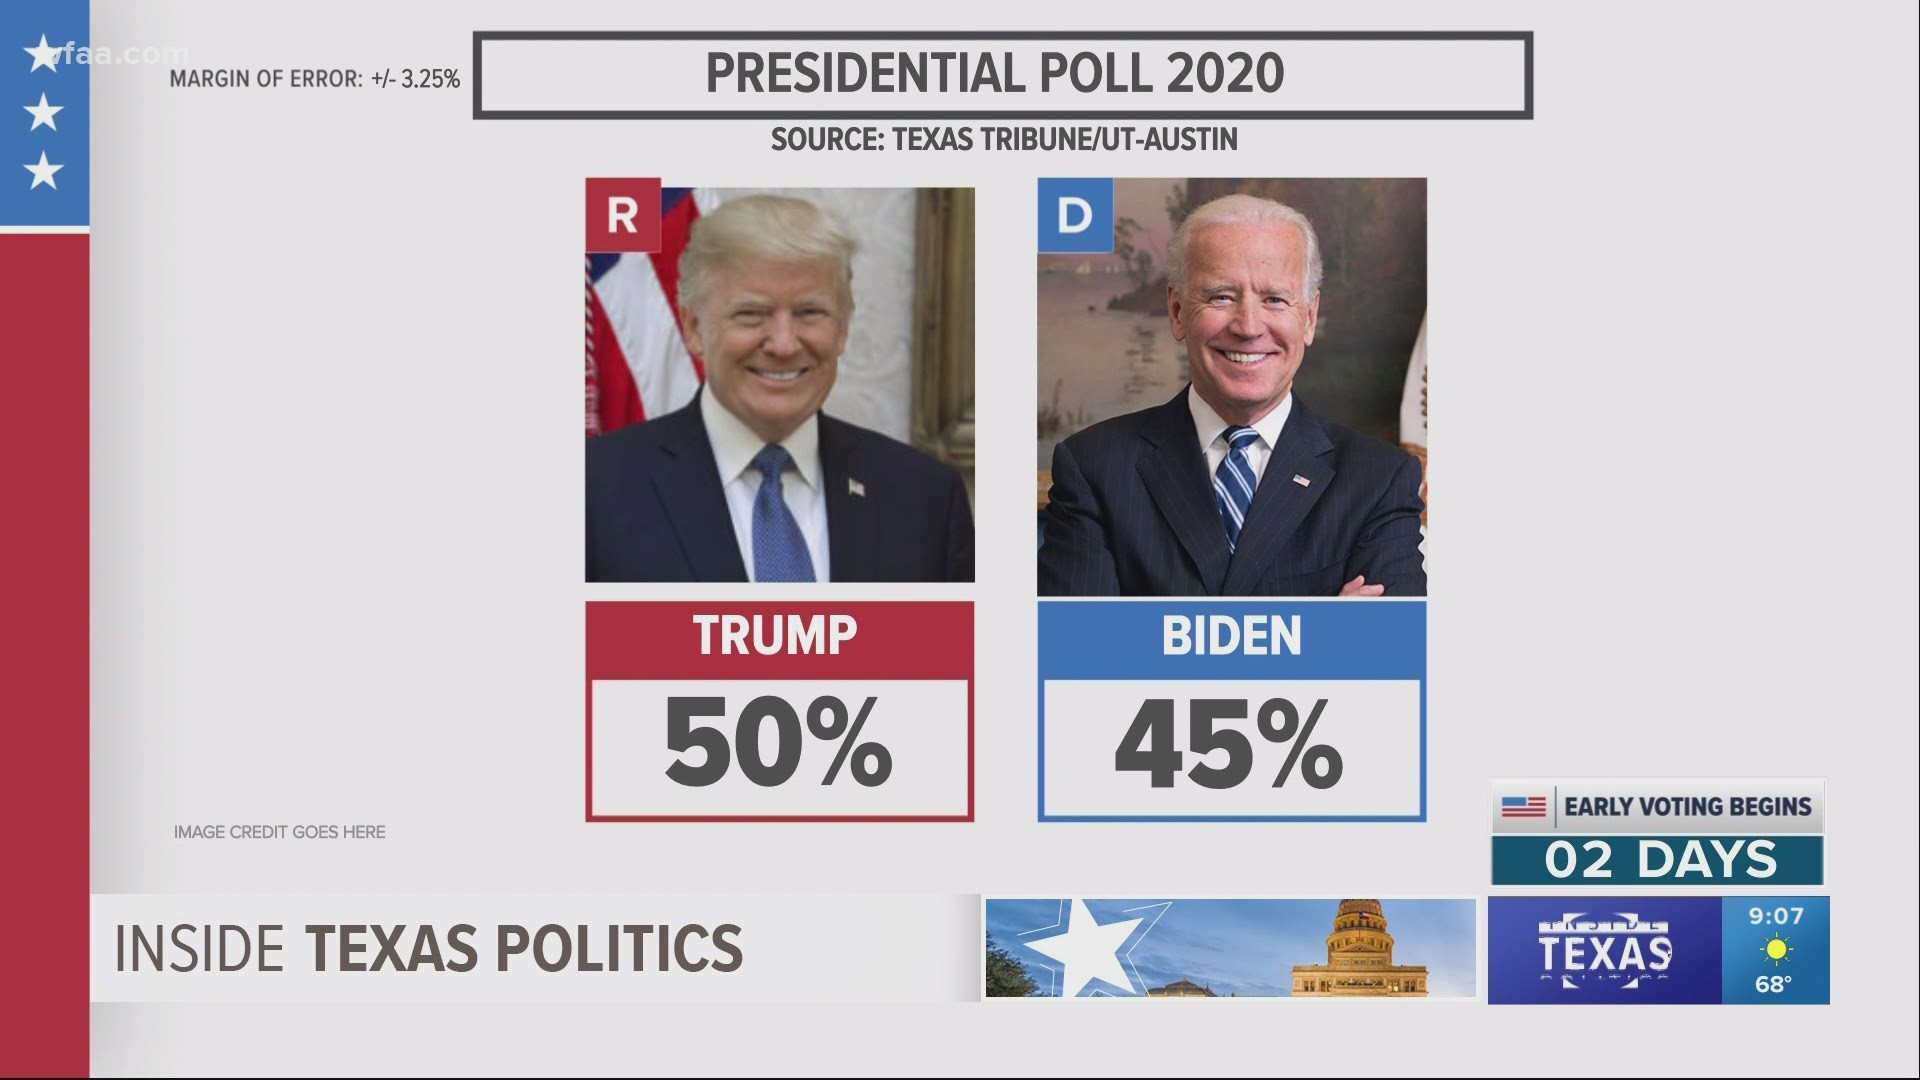 A new poll from the University of Texas and The Texas Tribune shows President Donald Trump leading Joe Biden by 5%, but the race remains within the margin of error.